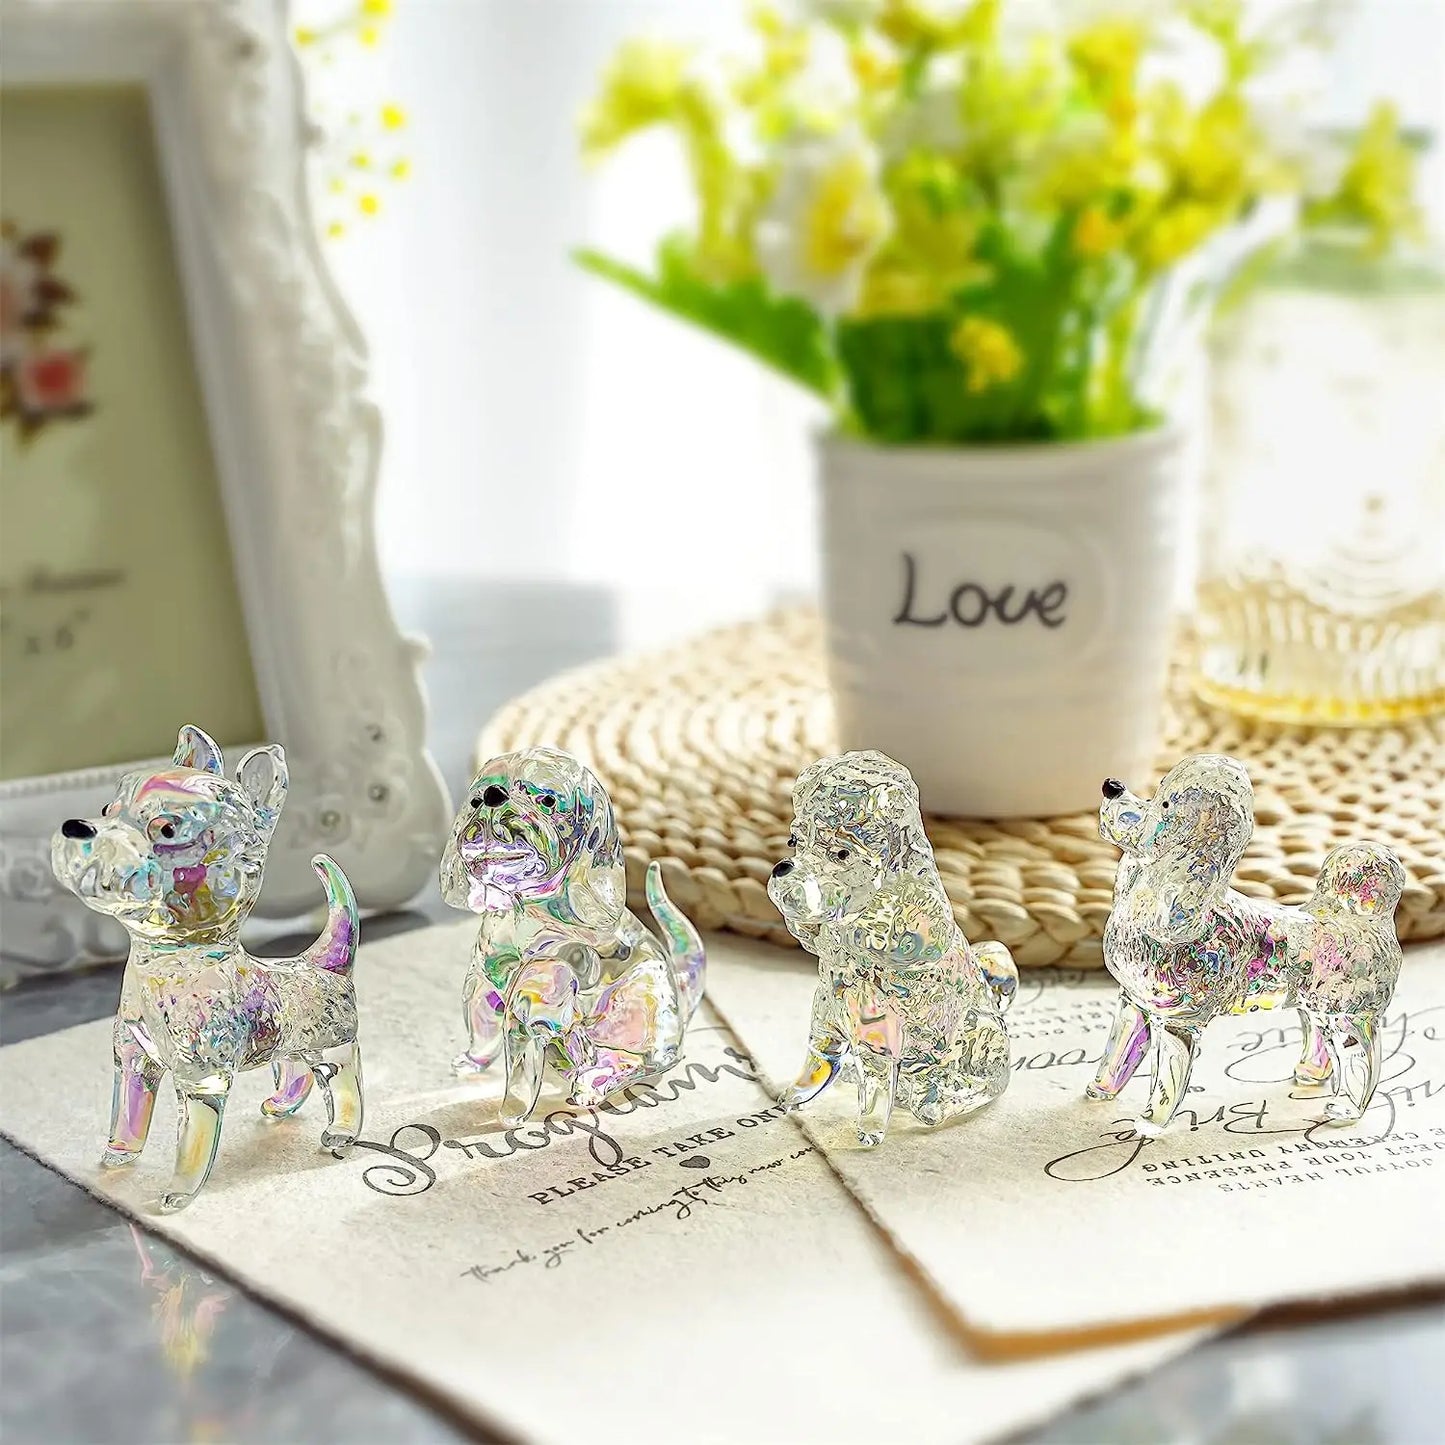 H&D 4 Different Shaped Crystal Dogs Figurines Art Glass Ornament Statue Animal Collectible Cute Paperweight Home Decorations